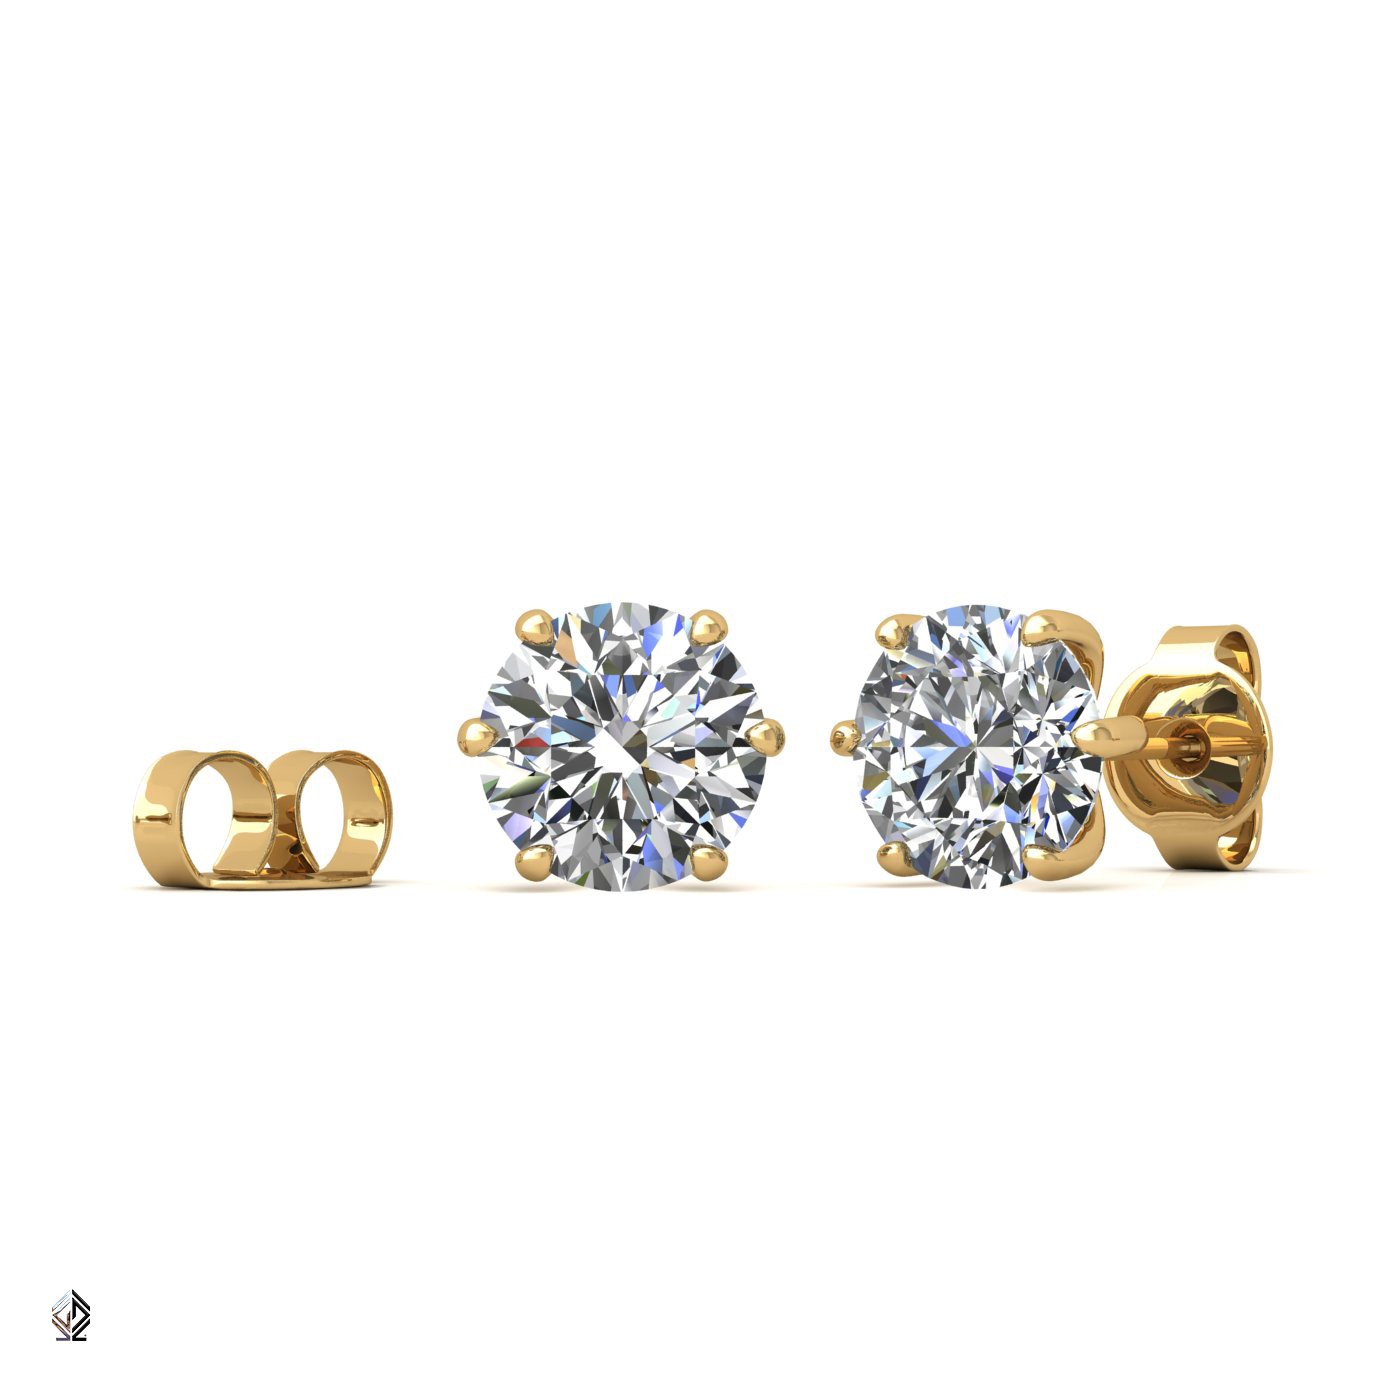 18k yellow gold 1.0 ct each (2,0 tcw) 6 prongs round shape diamond earrings Photos & images